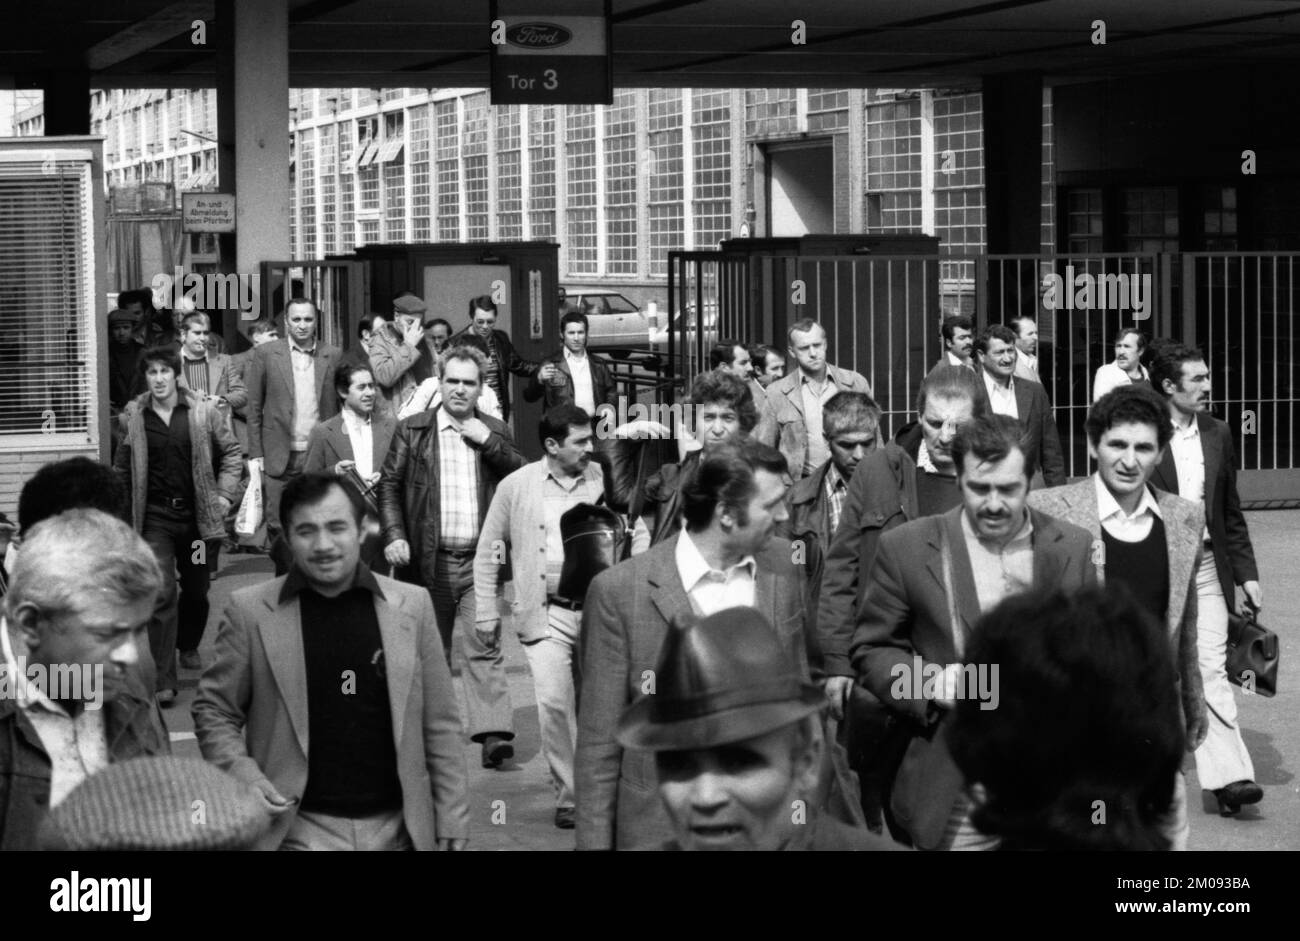 Shift change at Fordwerke, the proportion of Turkish migrants is striking 09.05, 1979 in Cologne, Germany, Europe Stock Photo